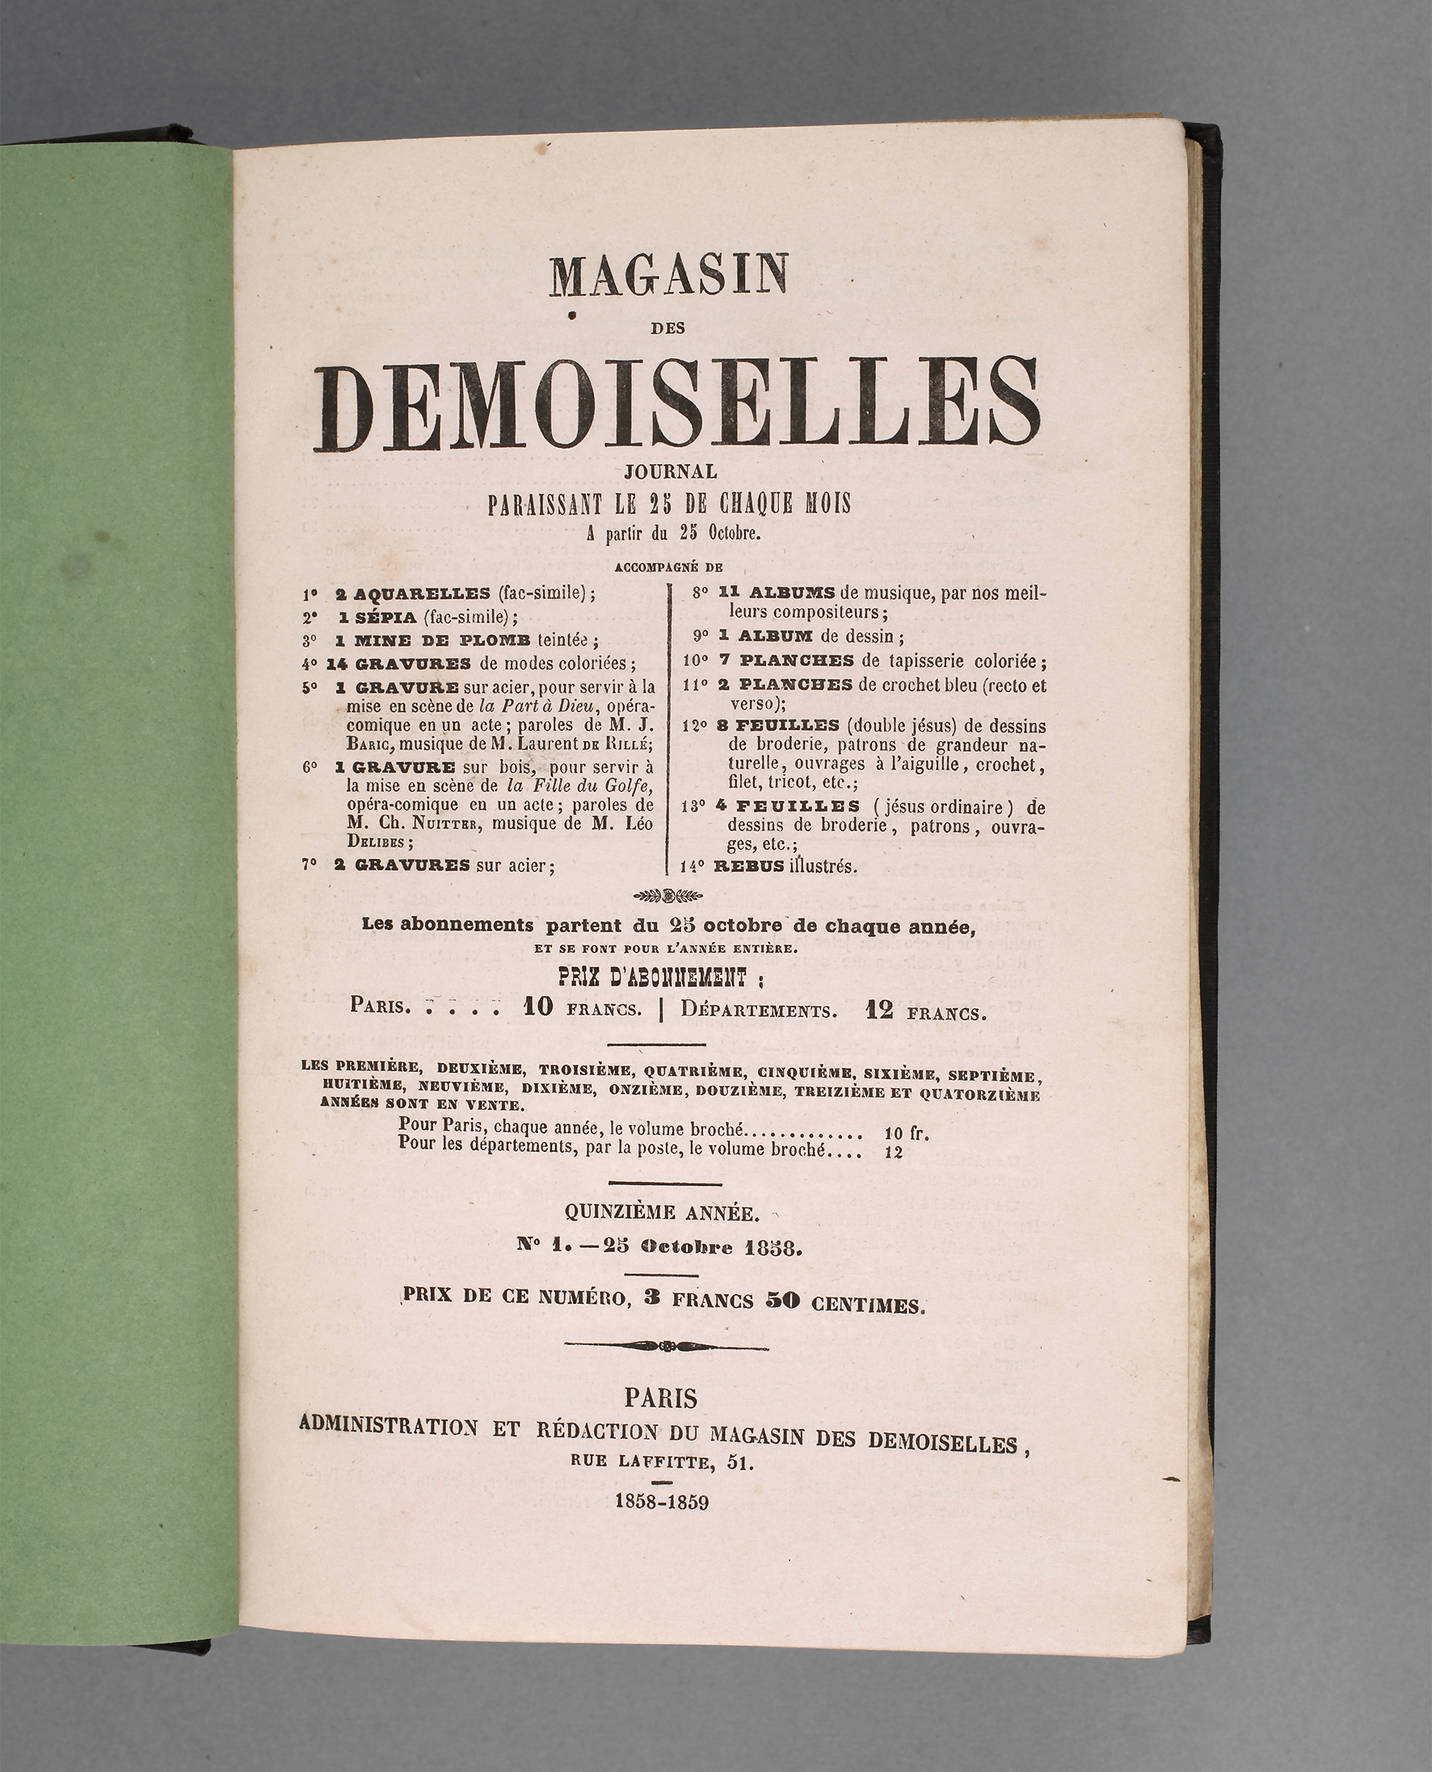 Modejournal 1858/59